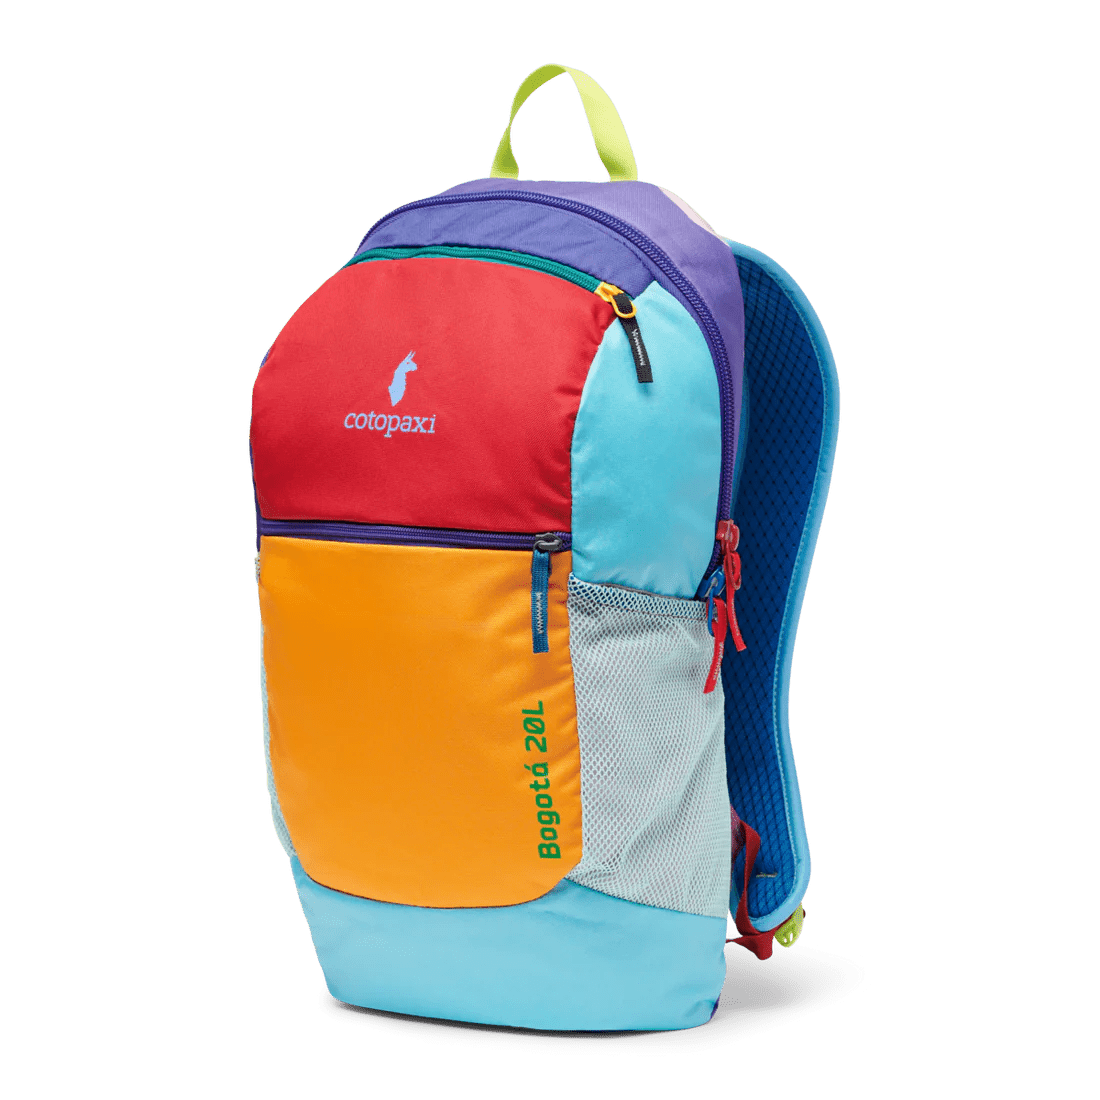 Bogota 20L Backpackpack - The Shoe CollectiveCotopaxi